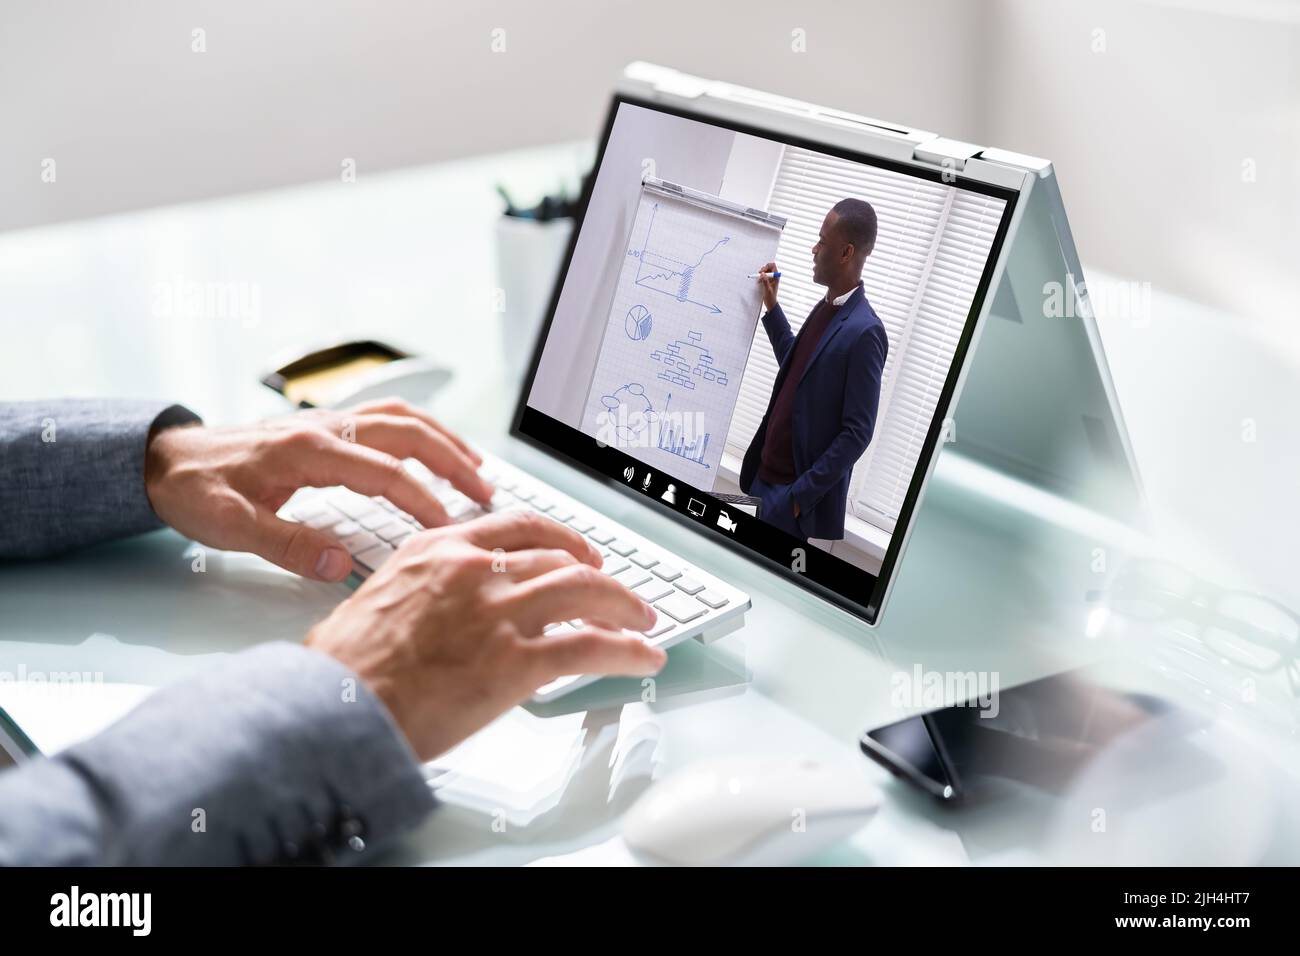 Coaching Lecture And Virtual Remote Training Session Stock Photo